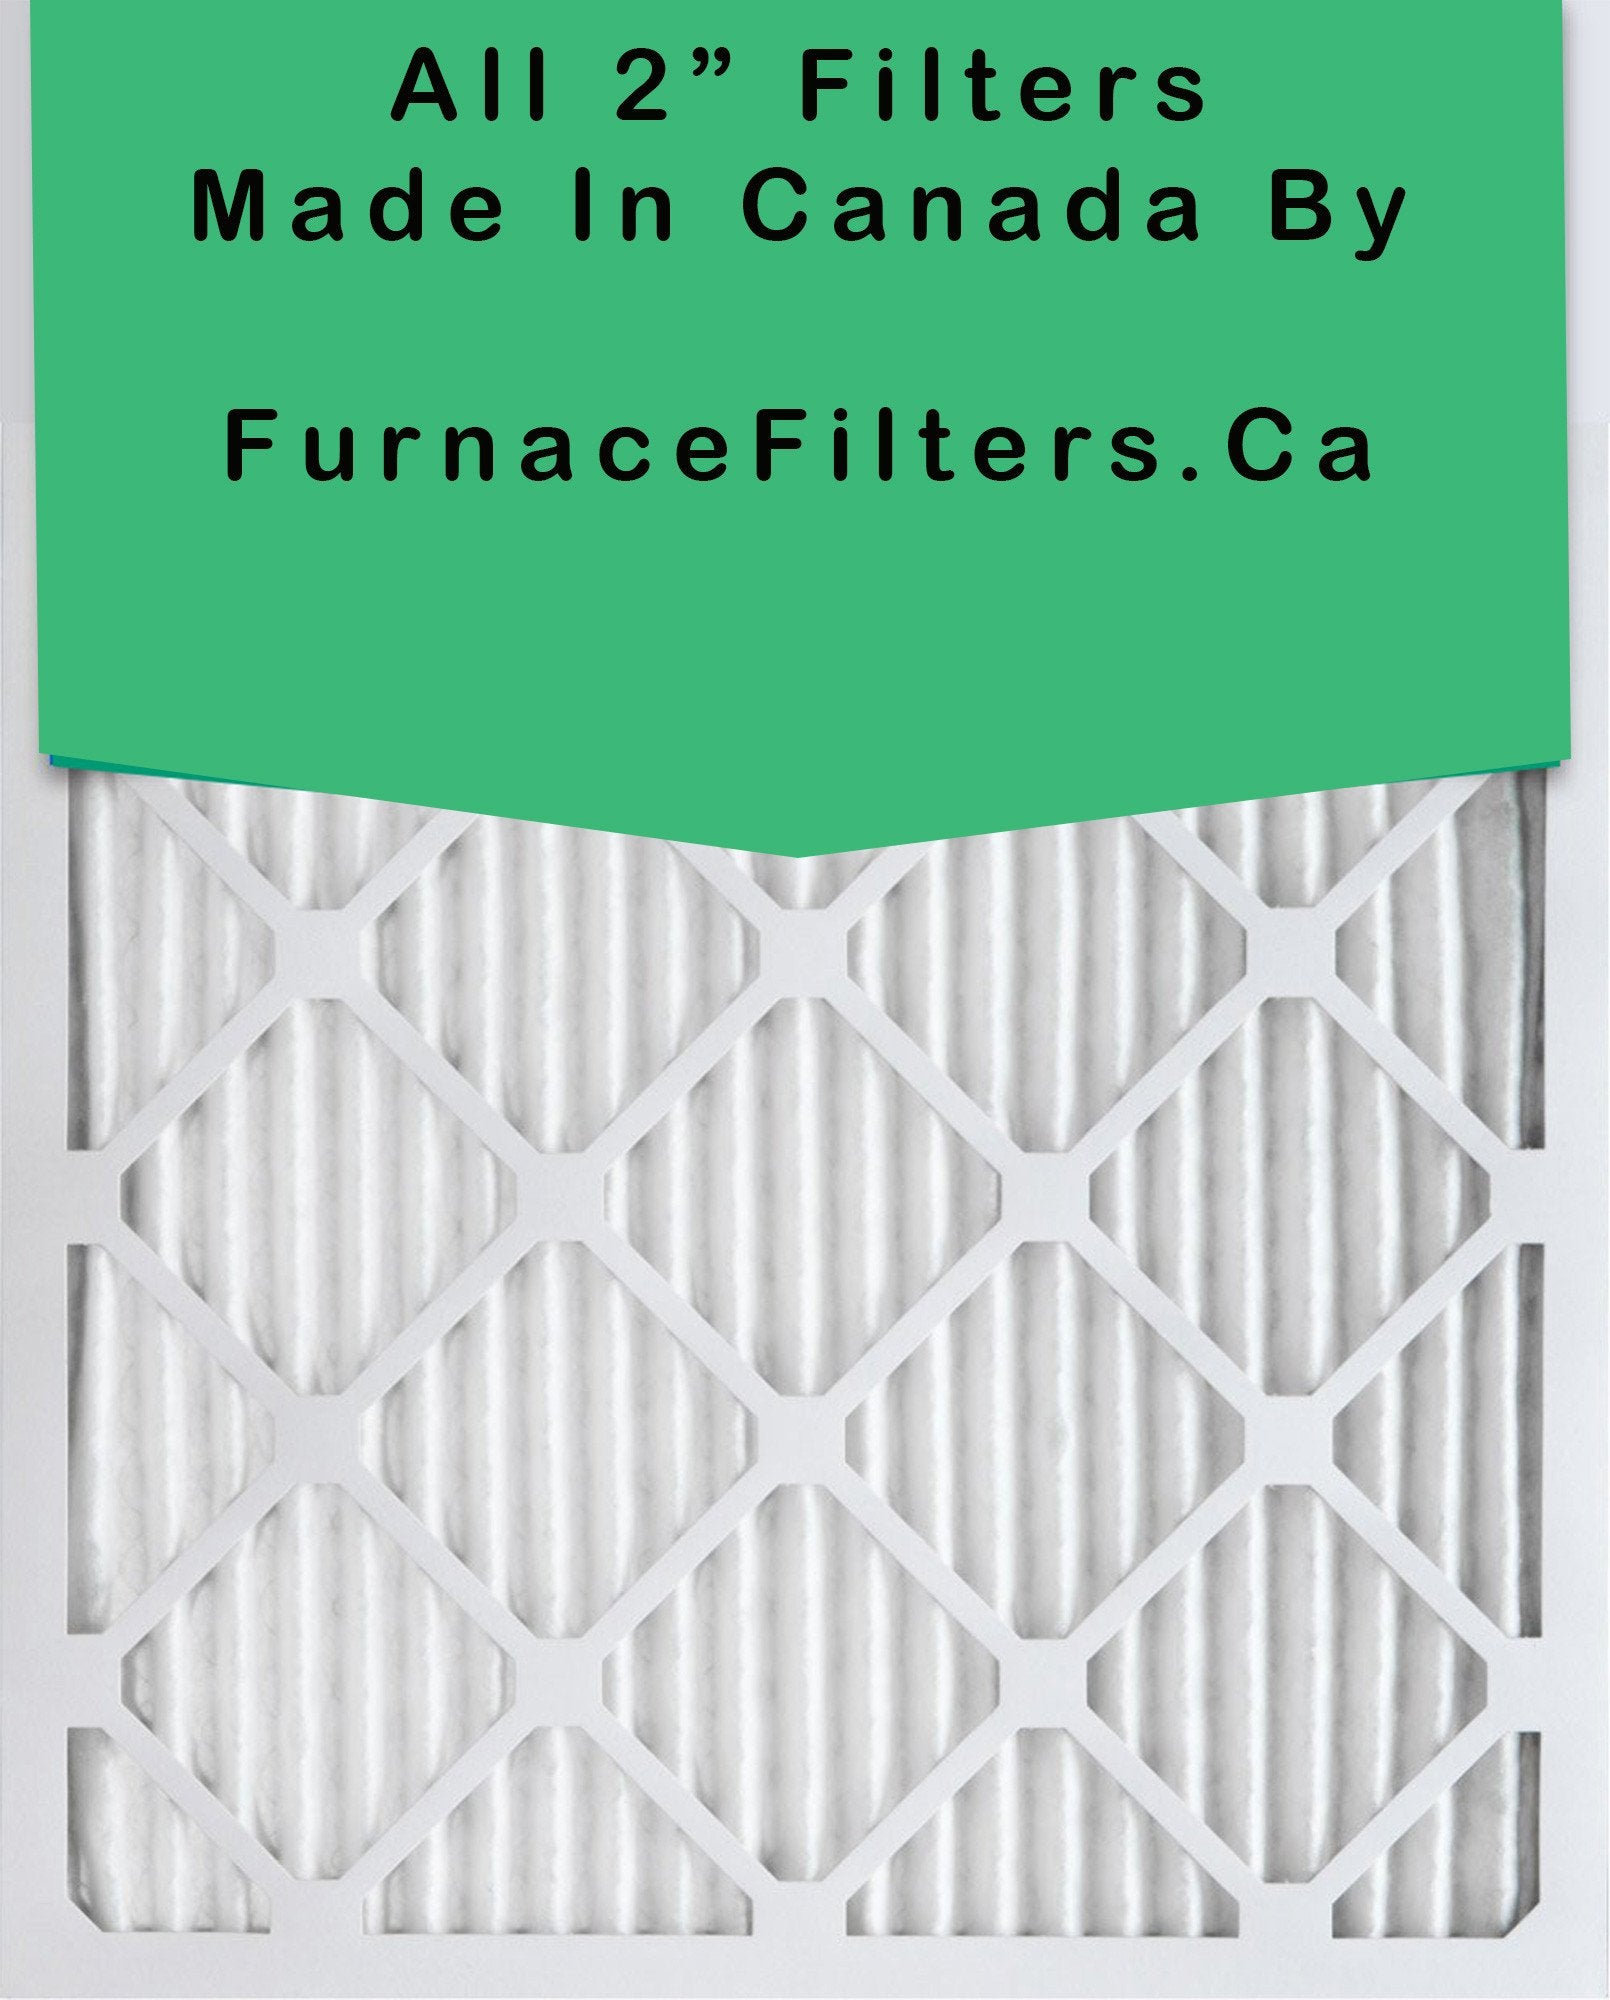 18x25x2 Furnace Filter MERV 8 Pleated Filters. Case of 12